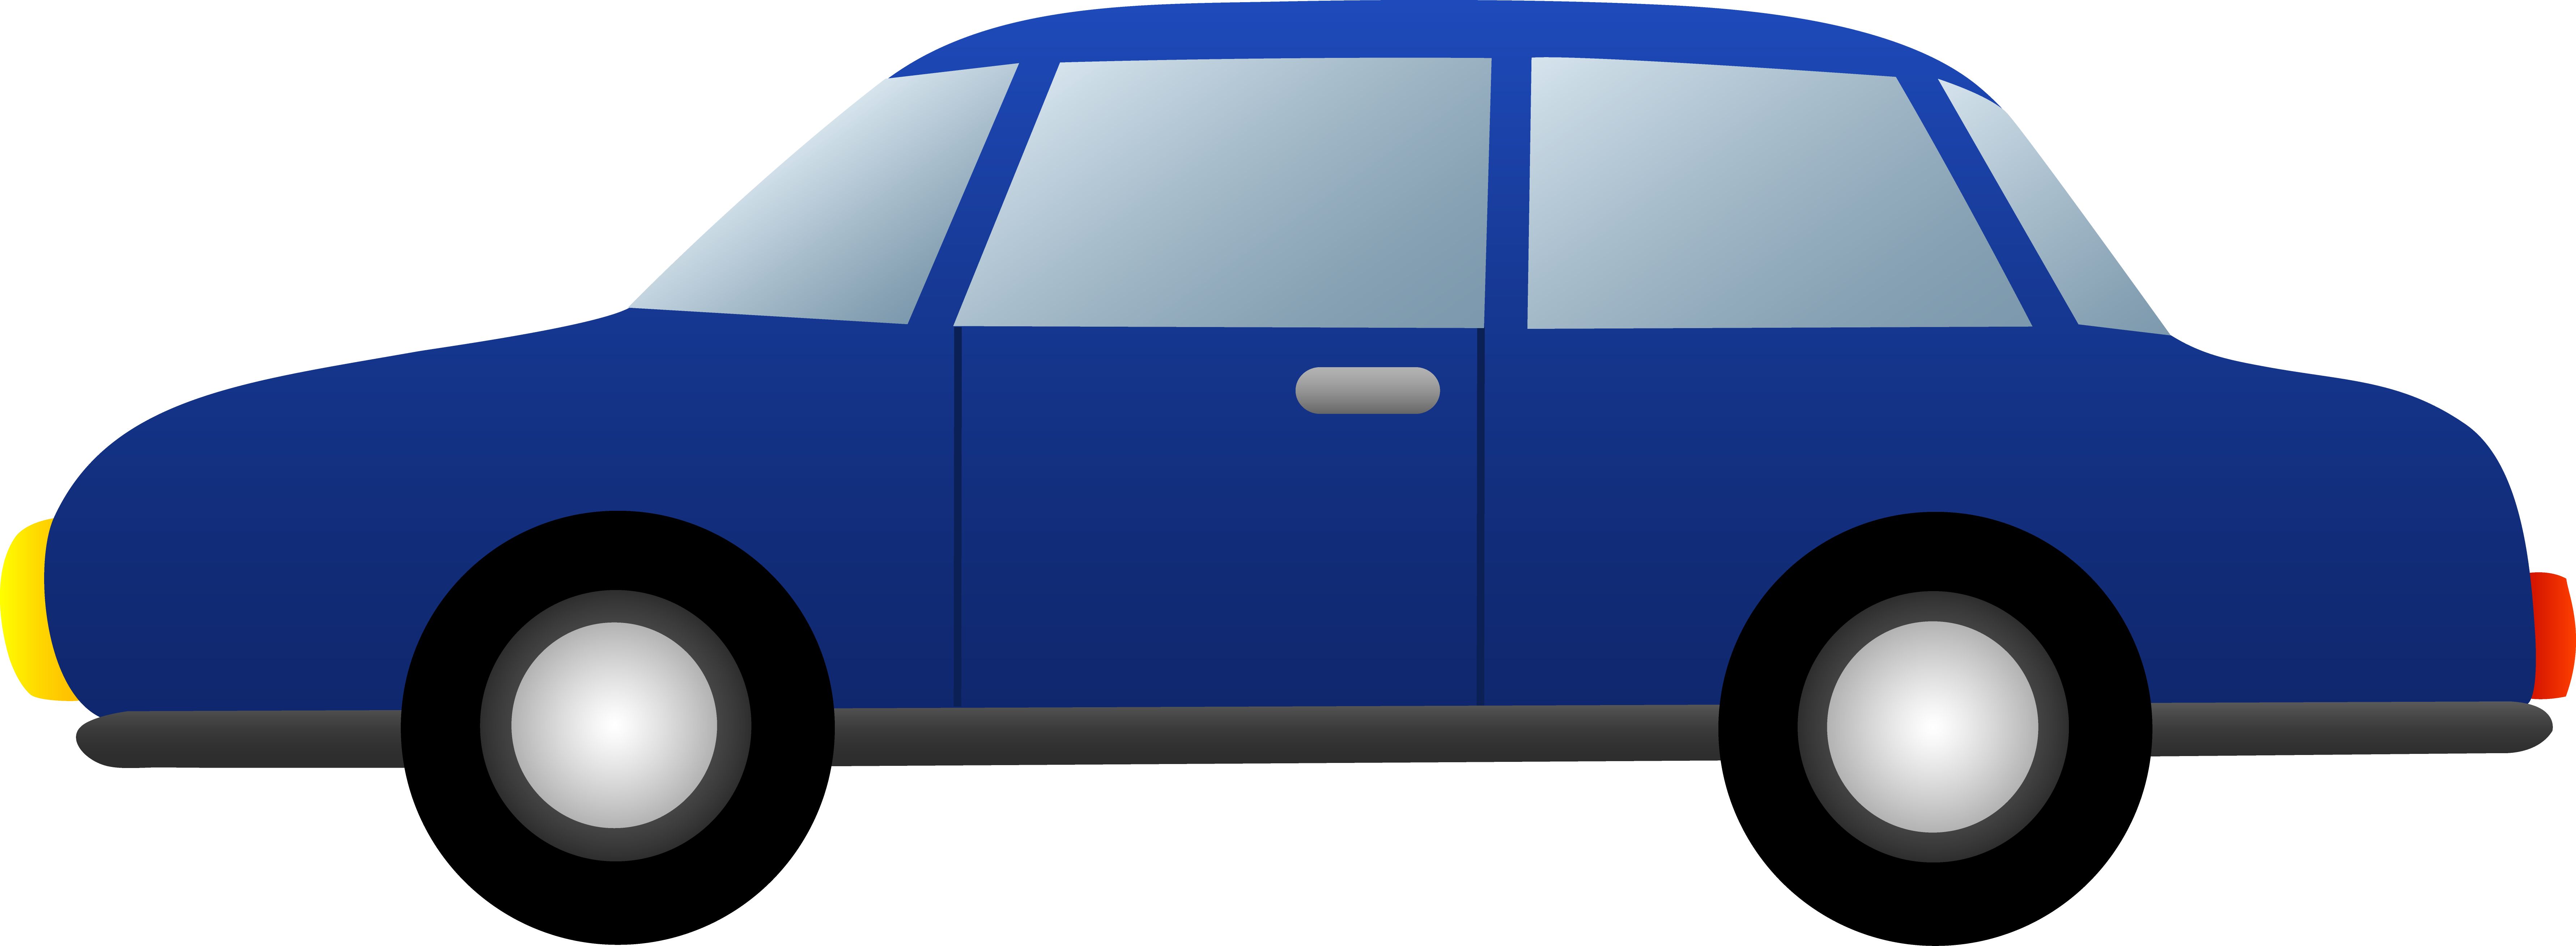 Vehicle Clipart Graphics | Clipart Panda - Free Clipart Images